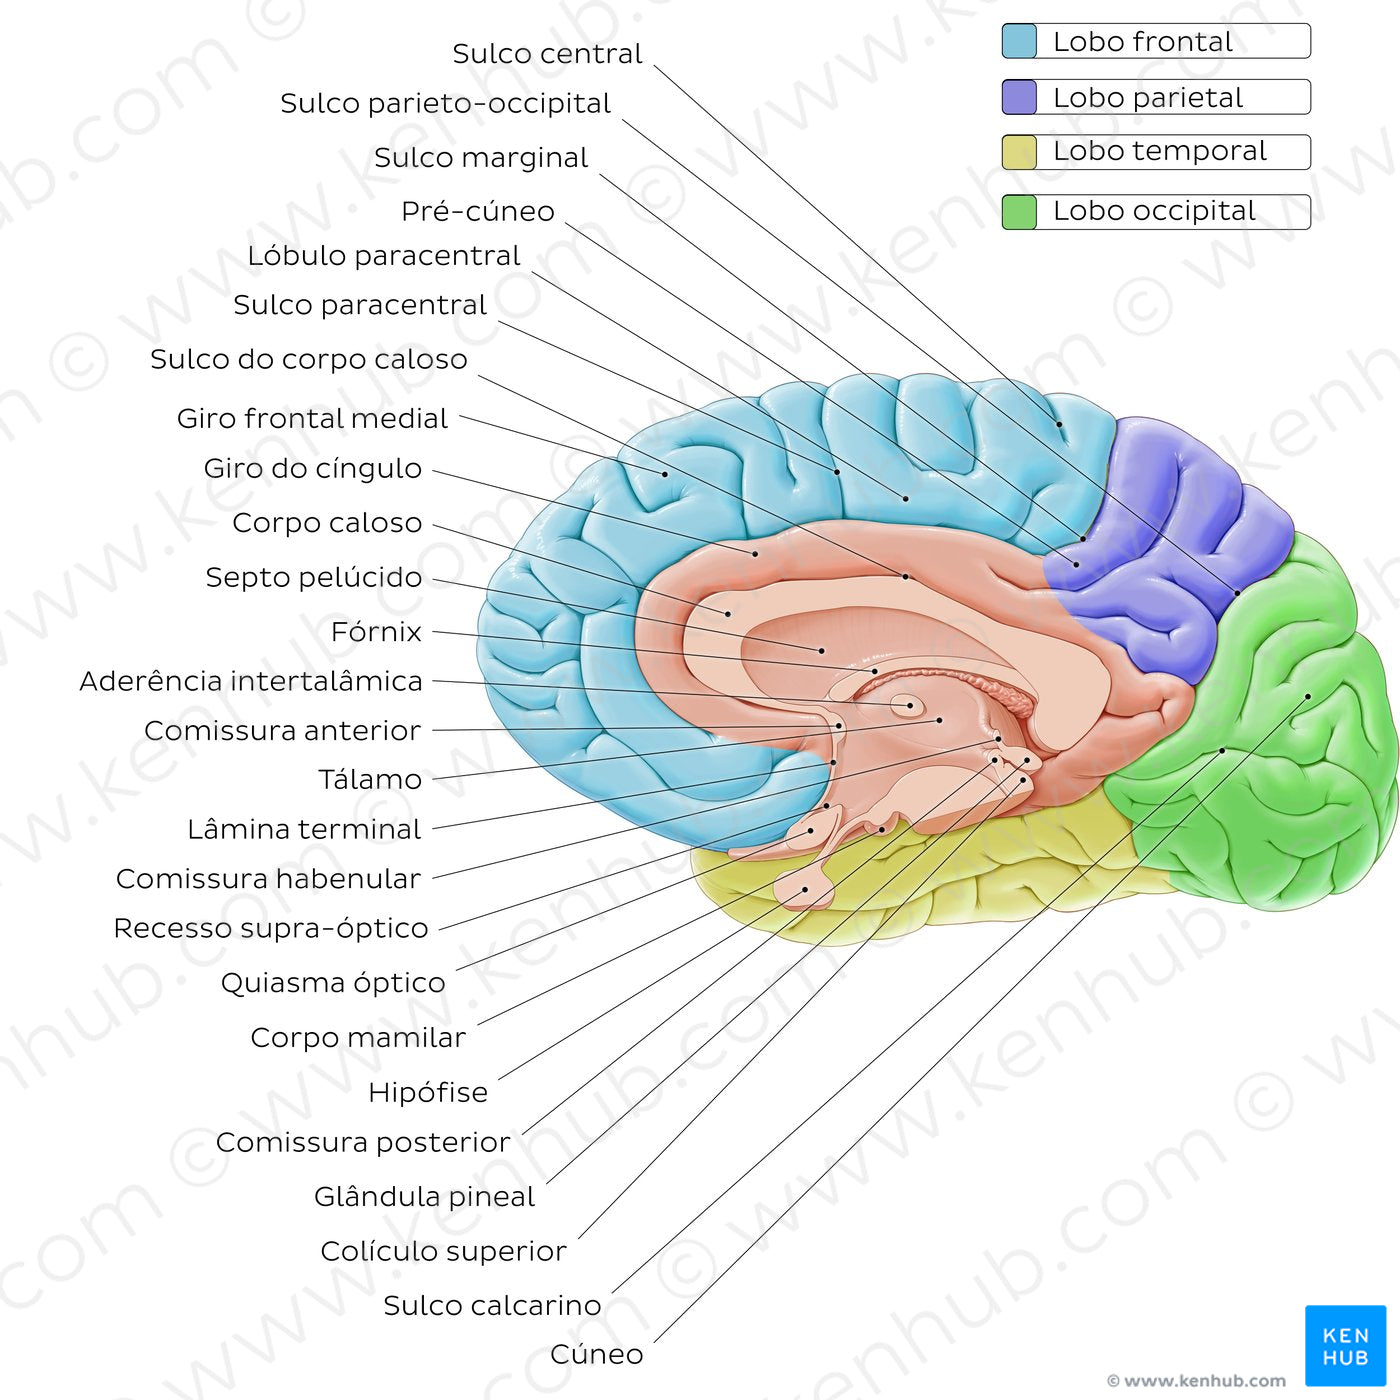 Medial view of the brain (Portuguese)